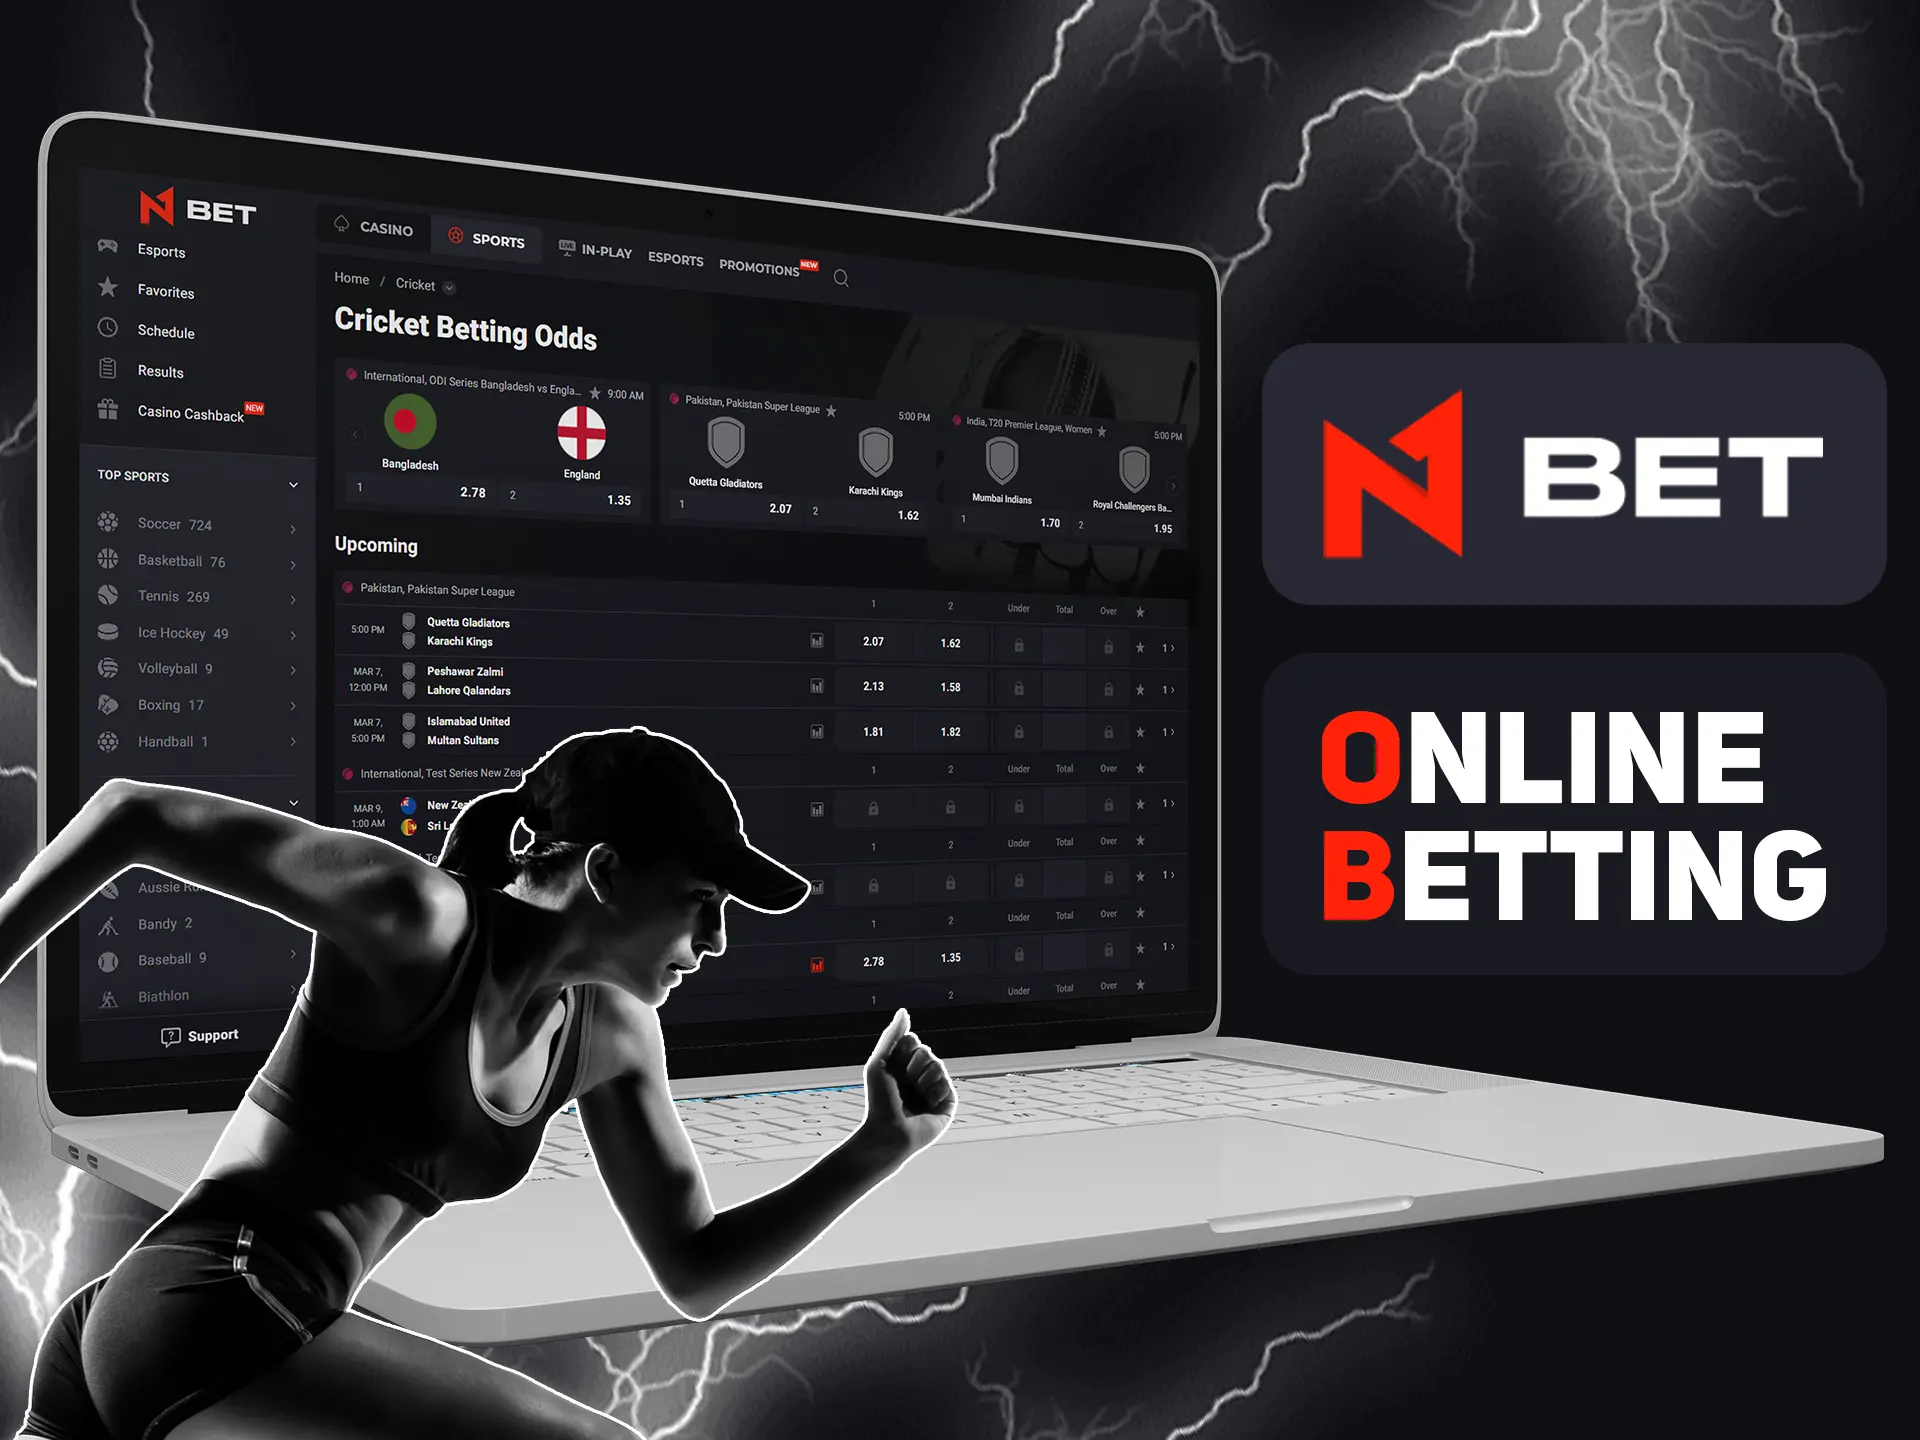 Bet on different sports at N1bet.